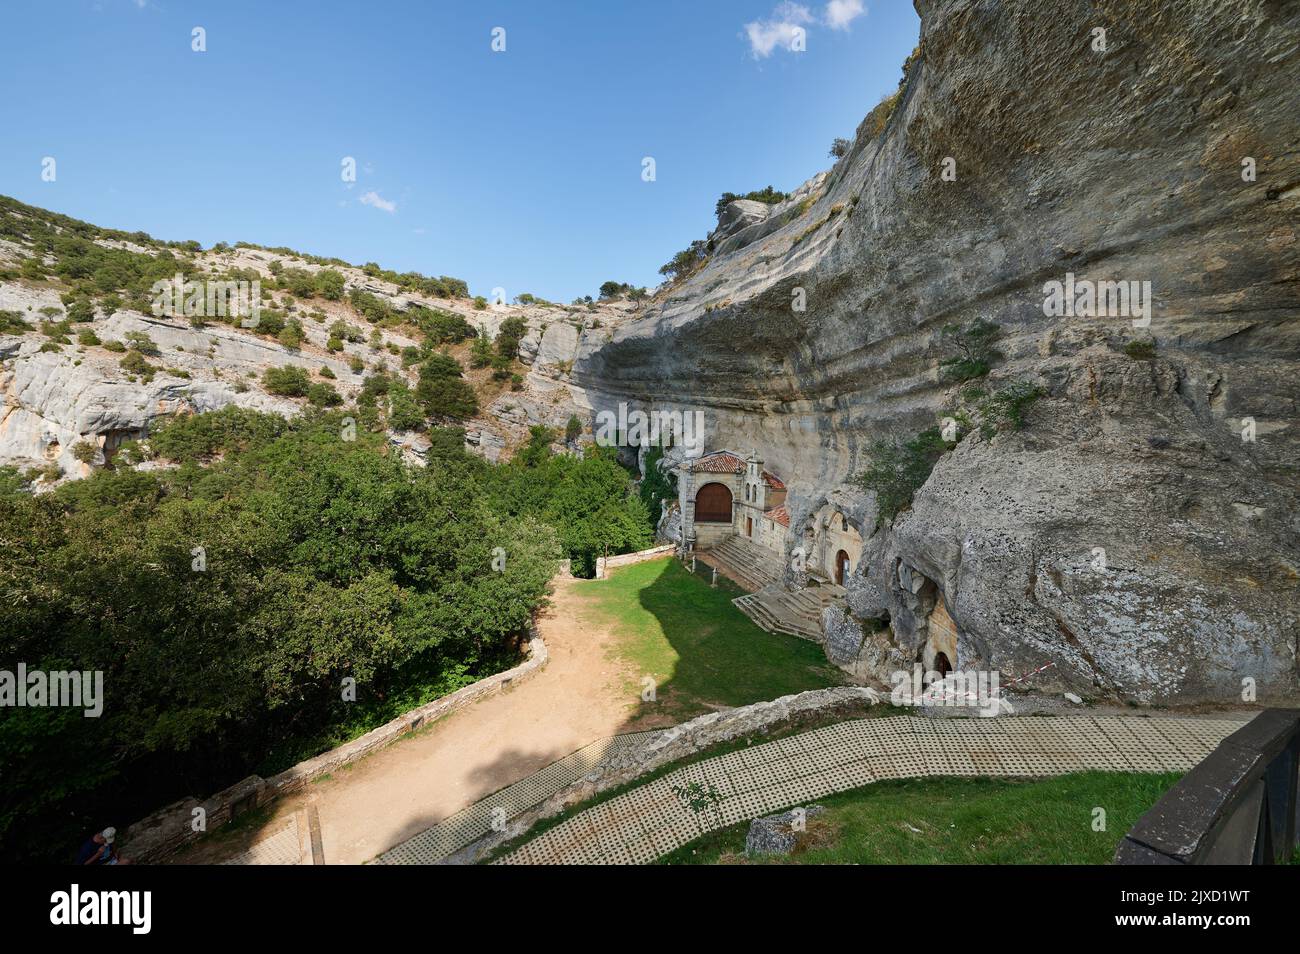 Hermitage of San Bernabe in the Ojo Guareña Karstic complex, National Monument in Castilla León, Spain, Europe Stock Photo